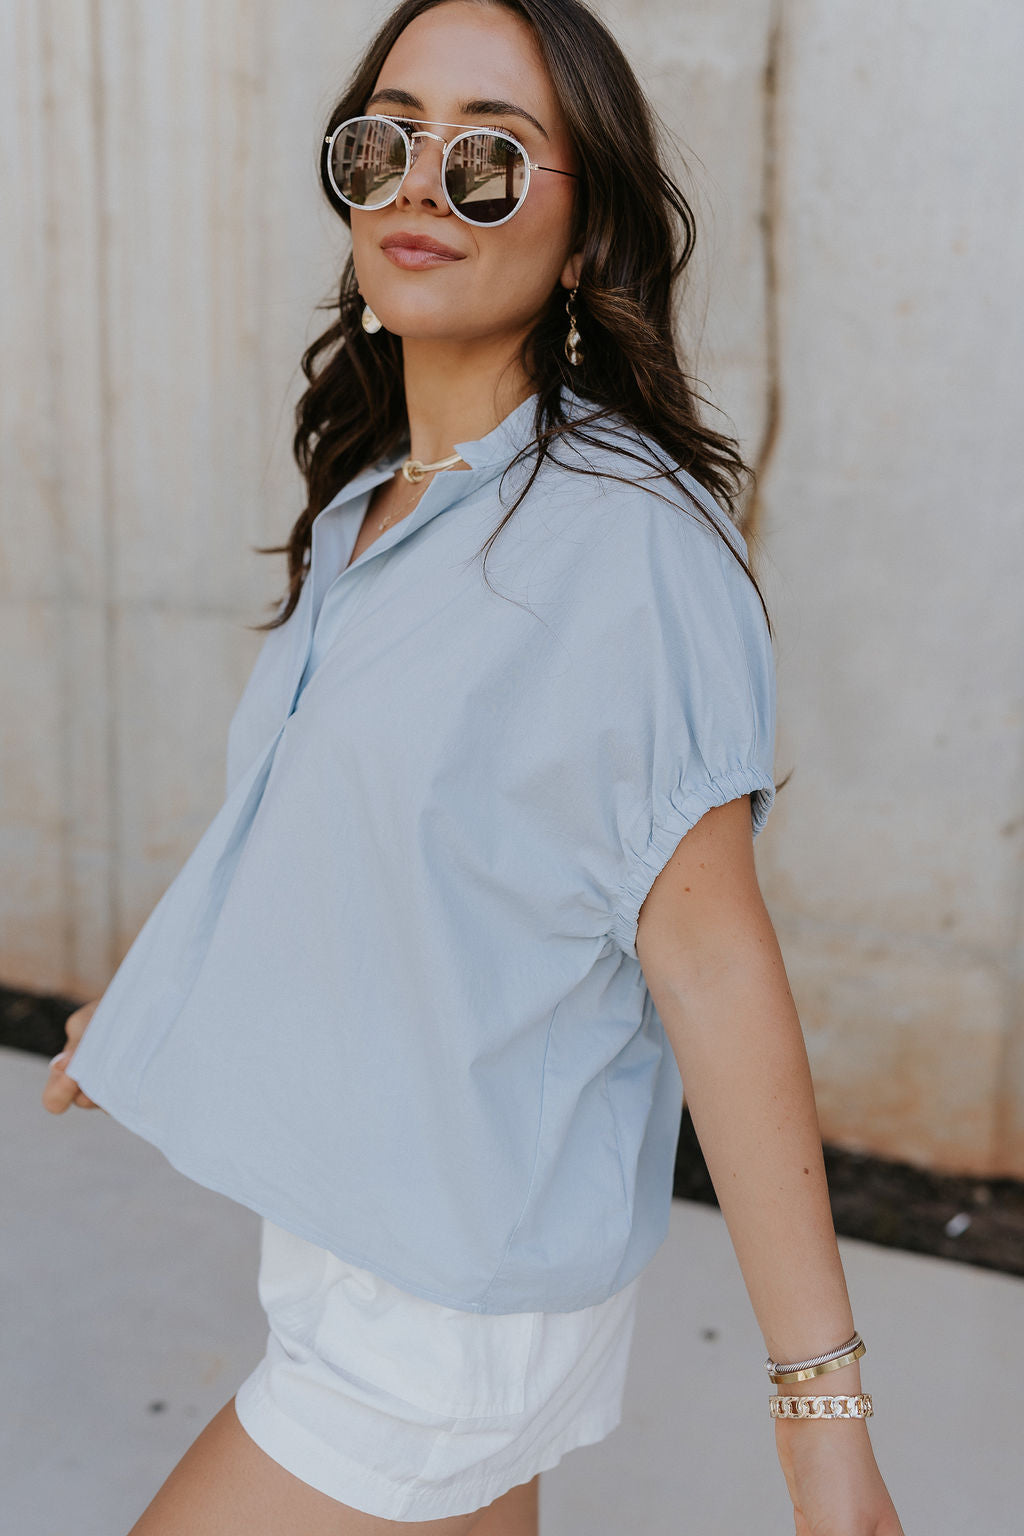 Side view of female model wearing the Noelle Chambray Blue Short Sleeve Top which features Light Blue Cotton Fabric, Slight Cropped Waist, Short Puff Sleeves and V-Neckline